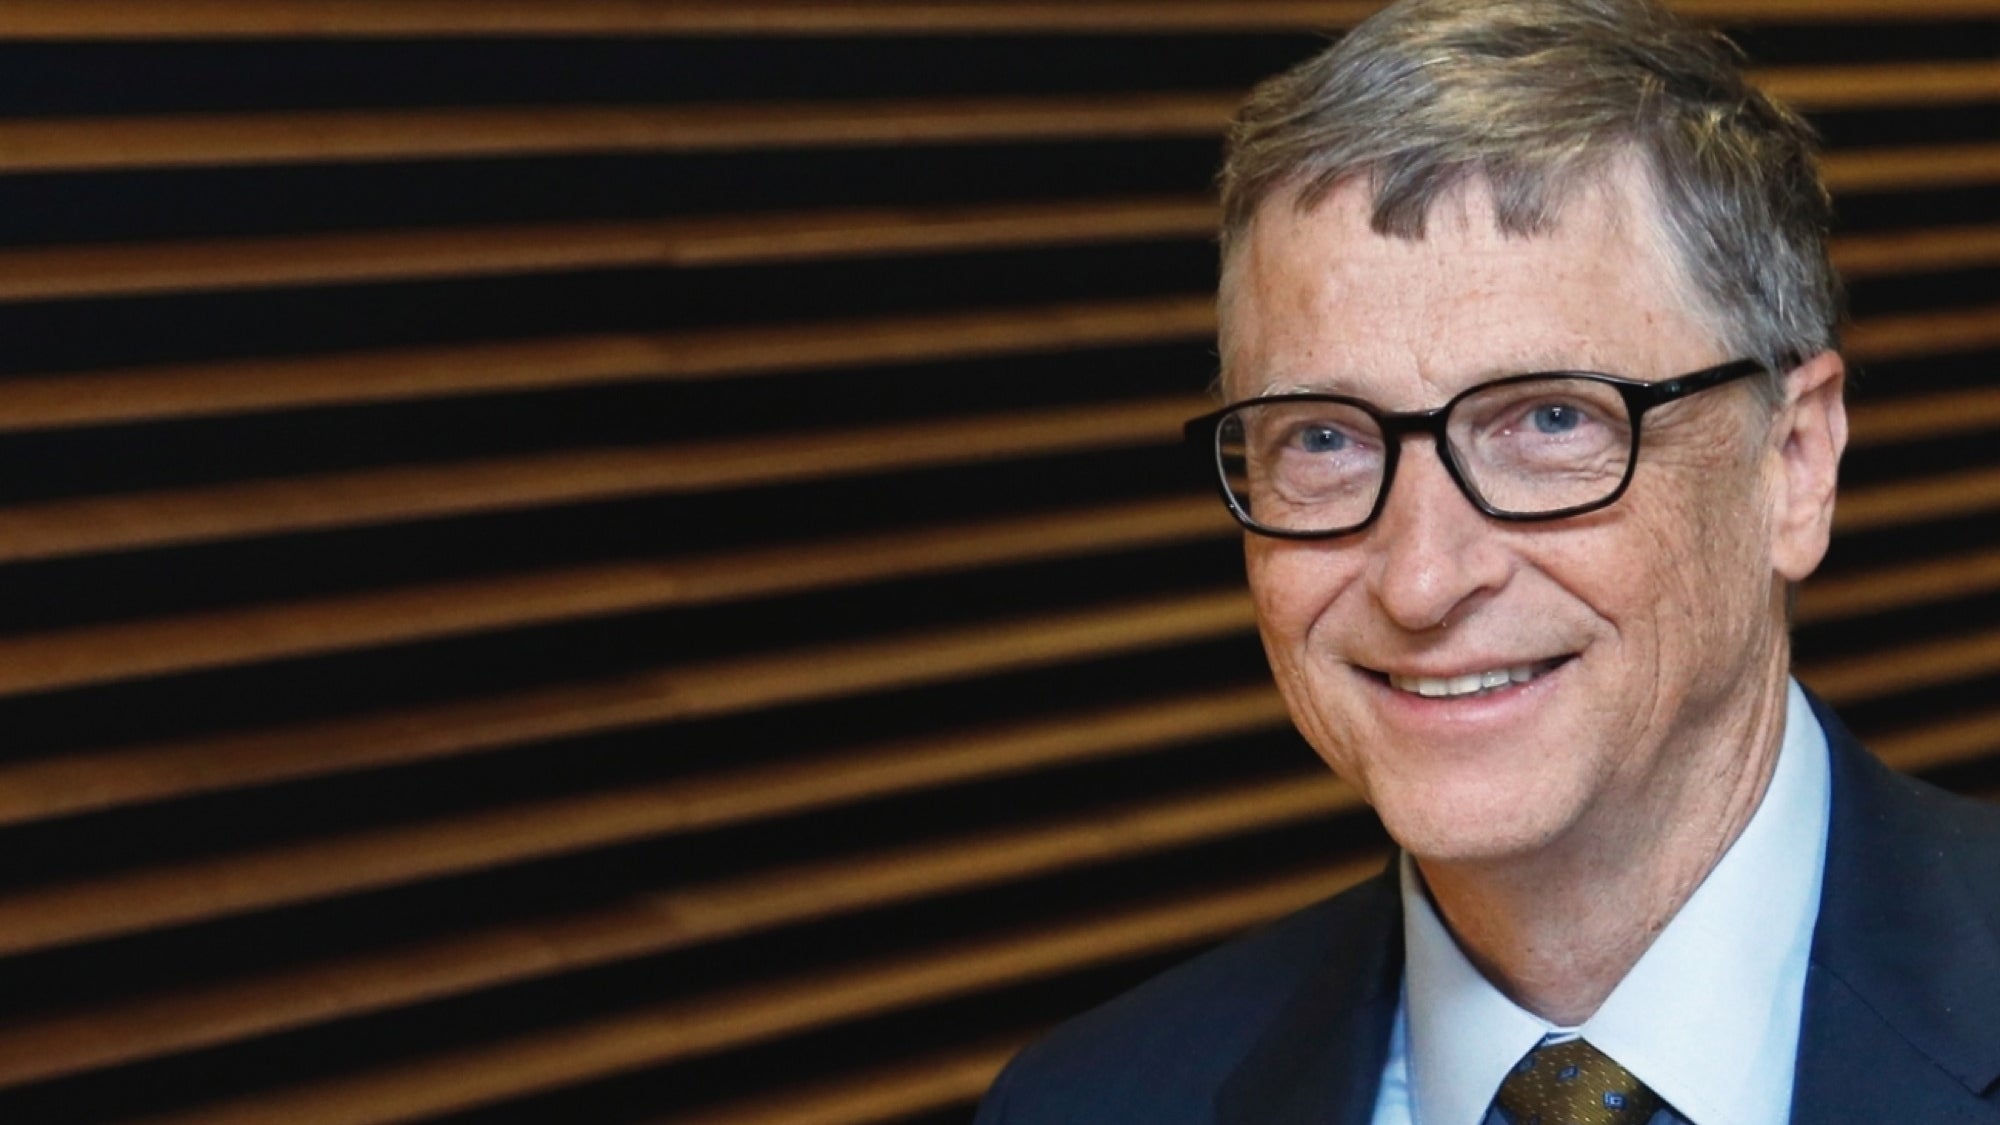 The Real Time World’s 20 Richest Billionaires